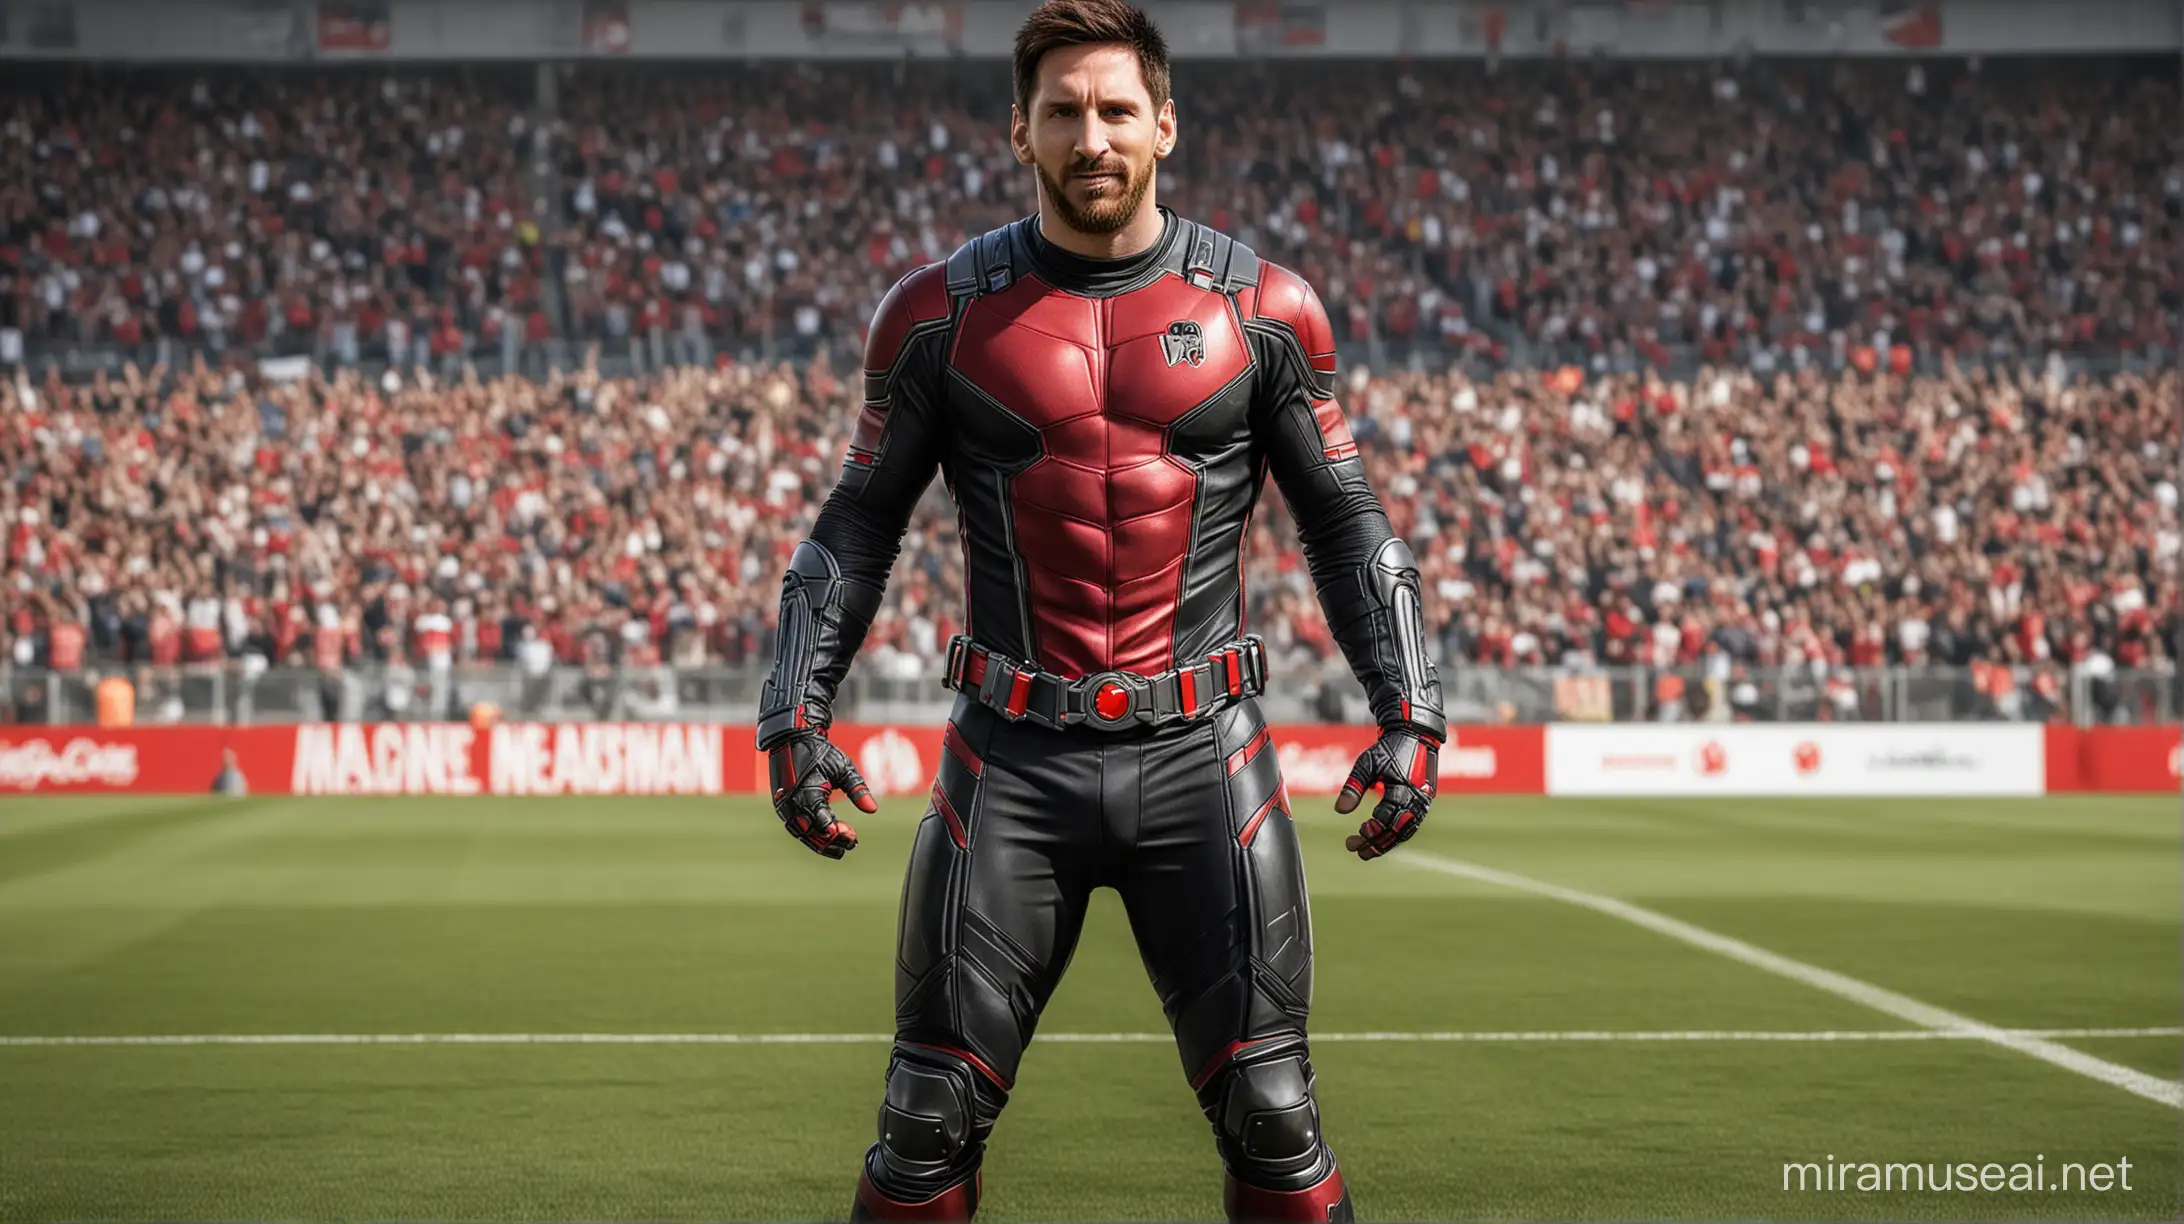 Lionel Messi Transforms into AntMan Soccer Superstar in Comic Book Gear Smiles on Field